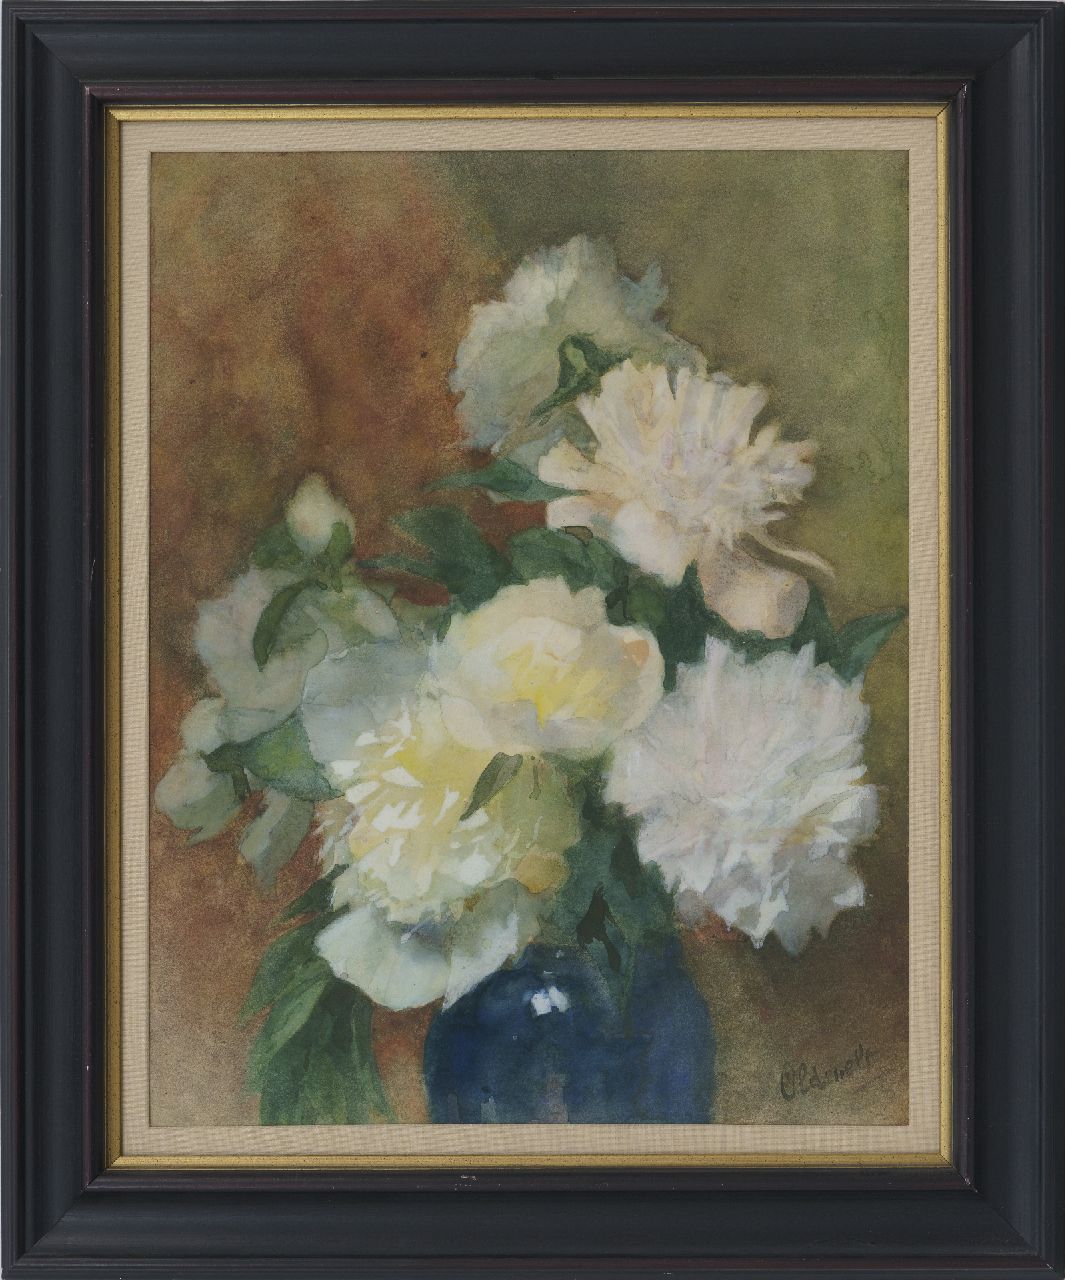 Oldewelt F.G.W.  | 'Ferdinand' Gustaaf Willem Oldewelt | Watercolours and drawings offered for sale | Peonies in a blue vase, watercolour on paper 50.3 x 38.3 cm, signed l.r.